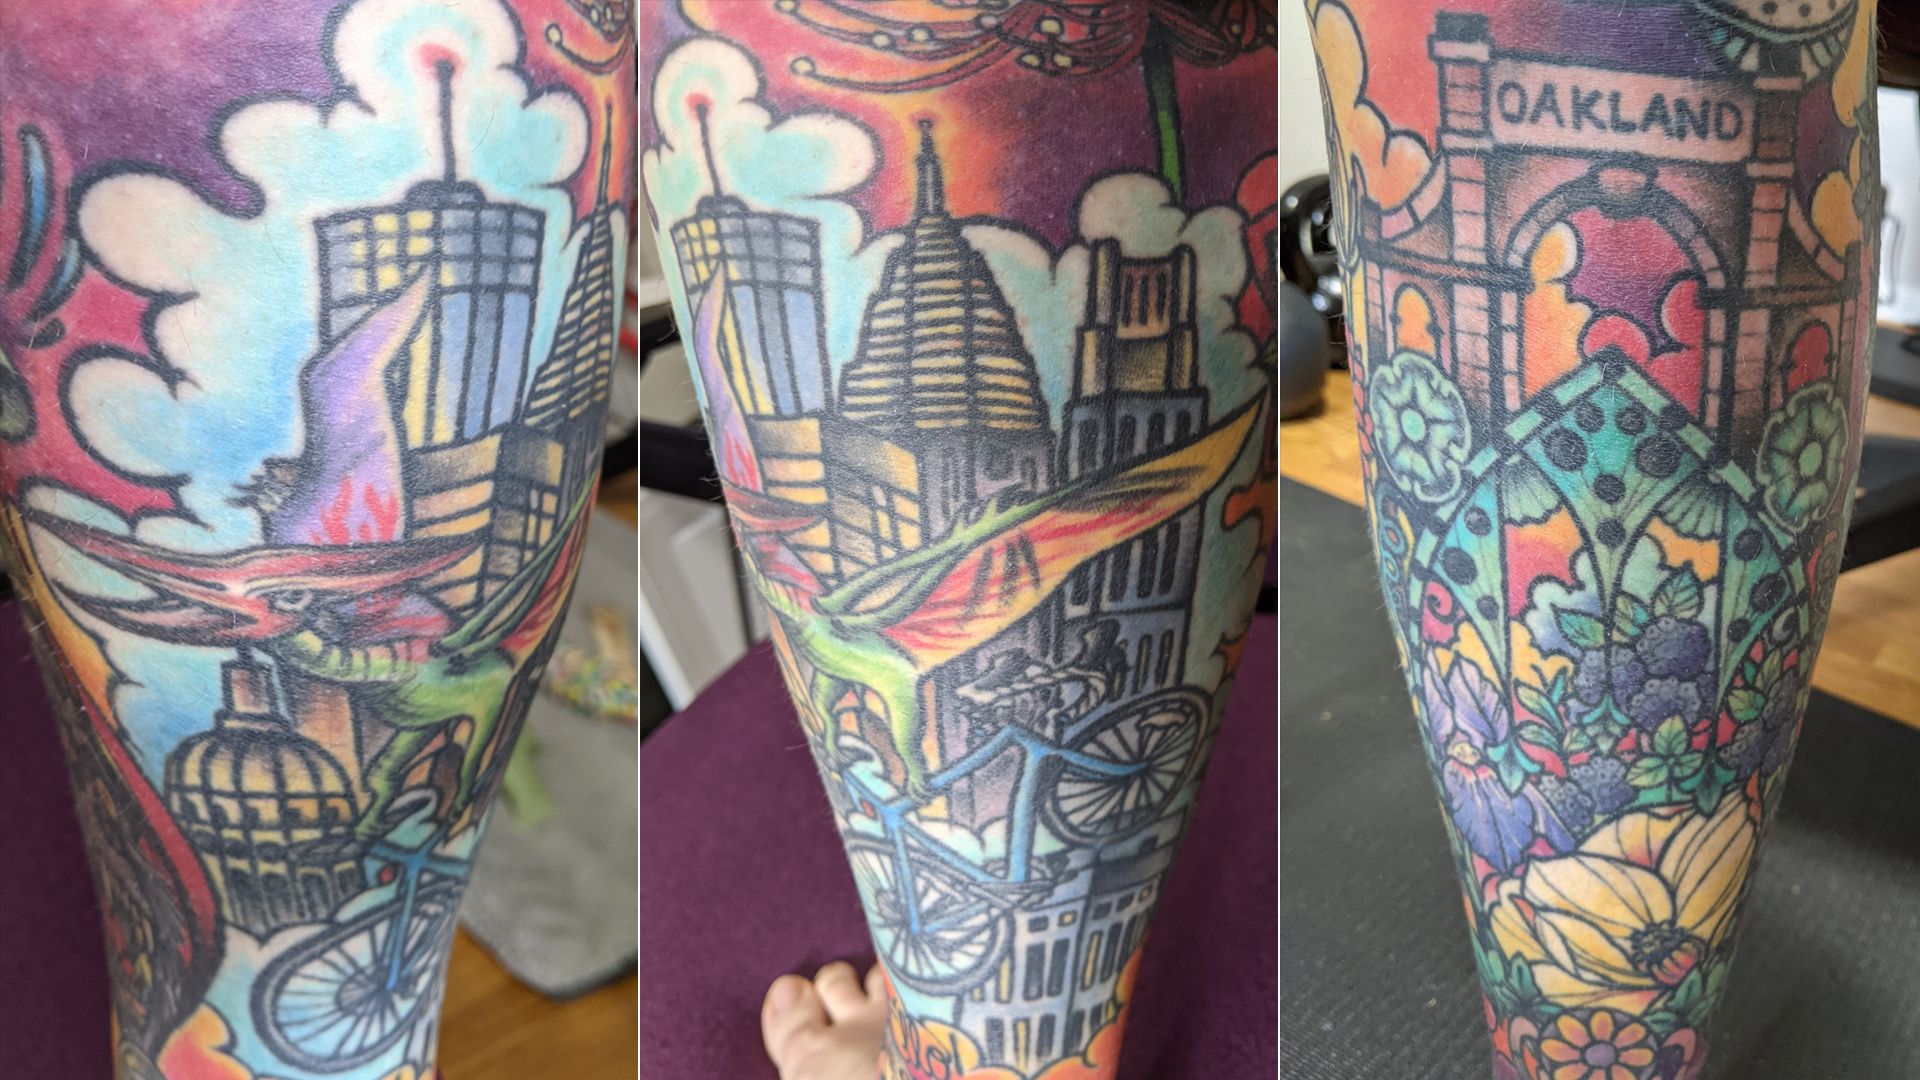 Detailed color tattoo of a dinosaur pulling a bicycle in front of the Atlanta skyline and another color tattoo of Oakland cemetery